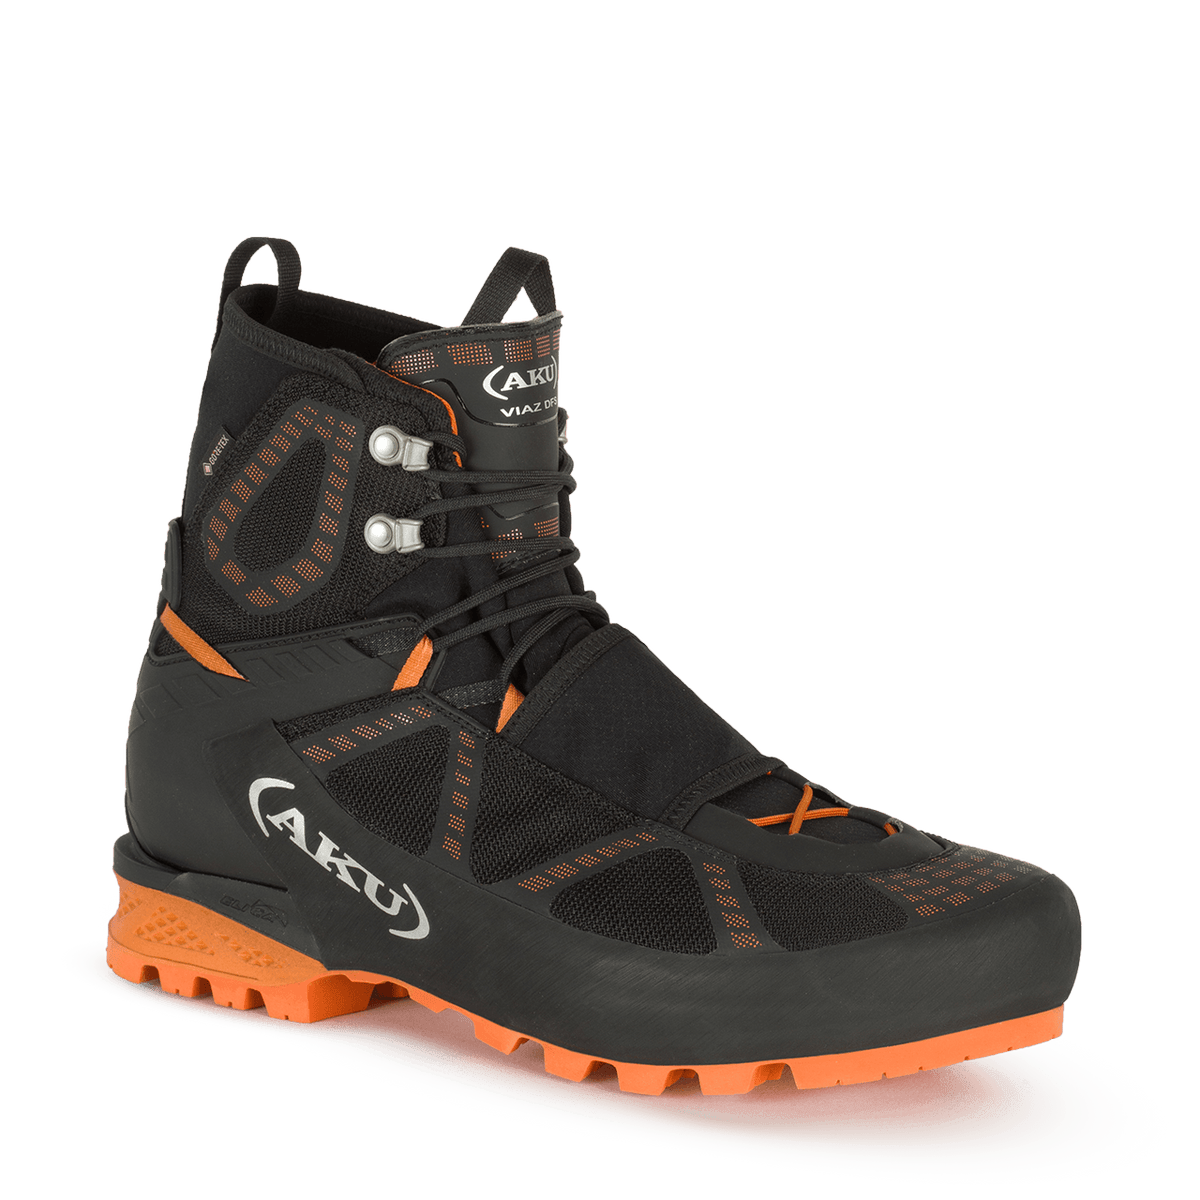 Viaz DFS GTX: footwear for technical and fast mountaineering 